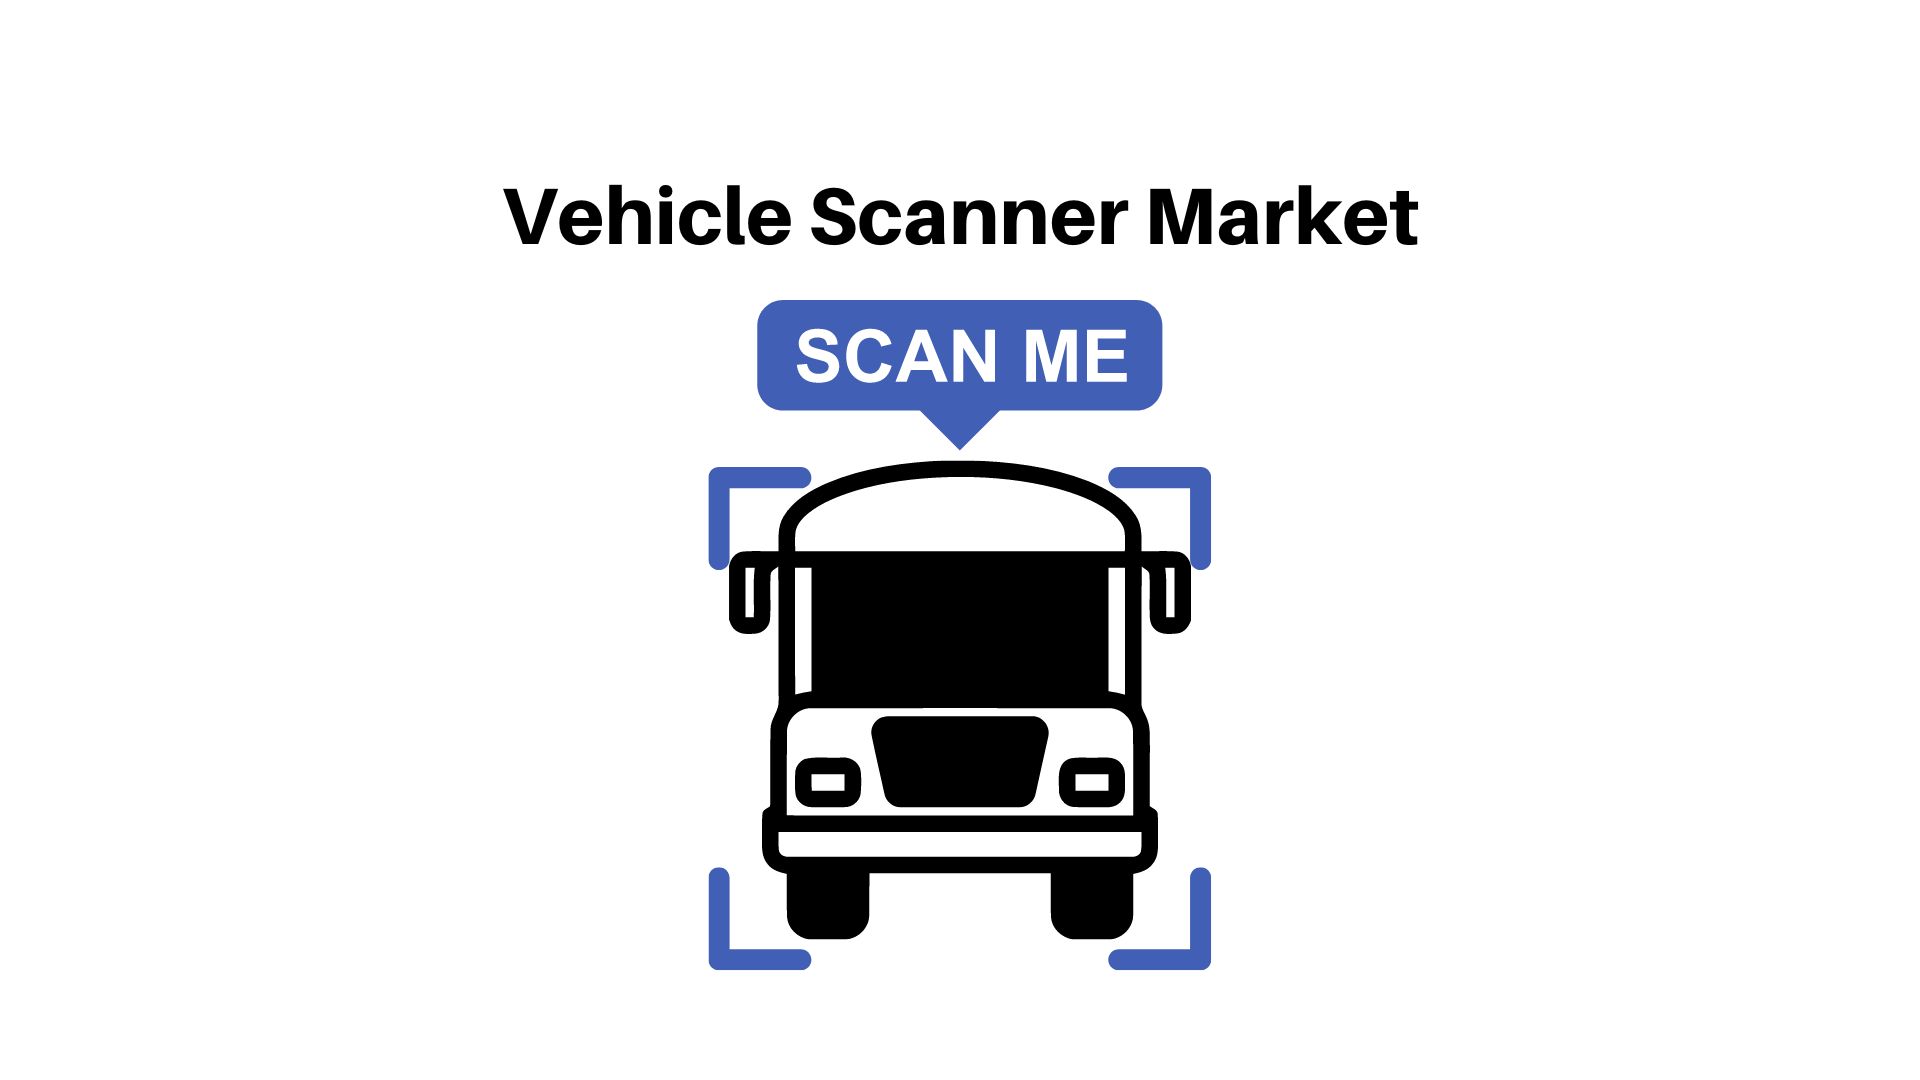 Vehicle Scanner Market estimated to reach USD 3.7 billion in 2023, growing at a CAGR of 6%